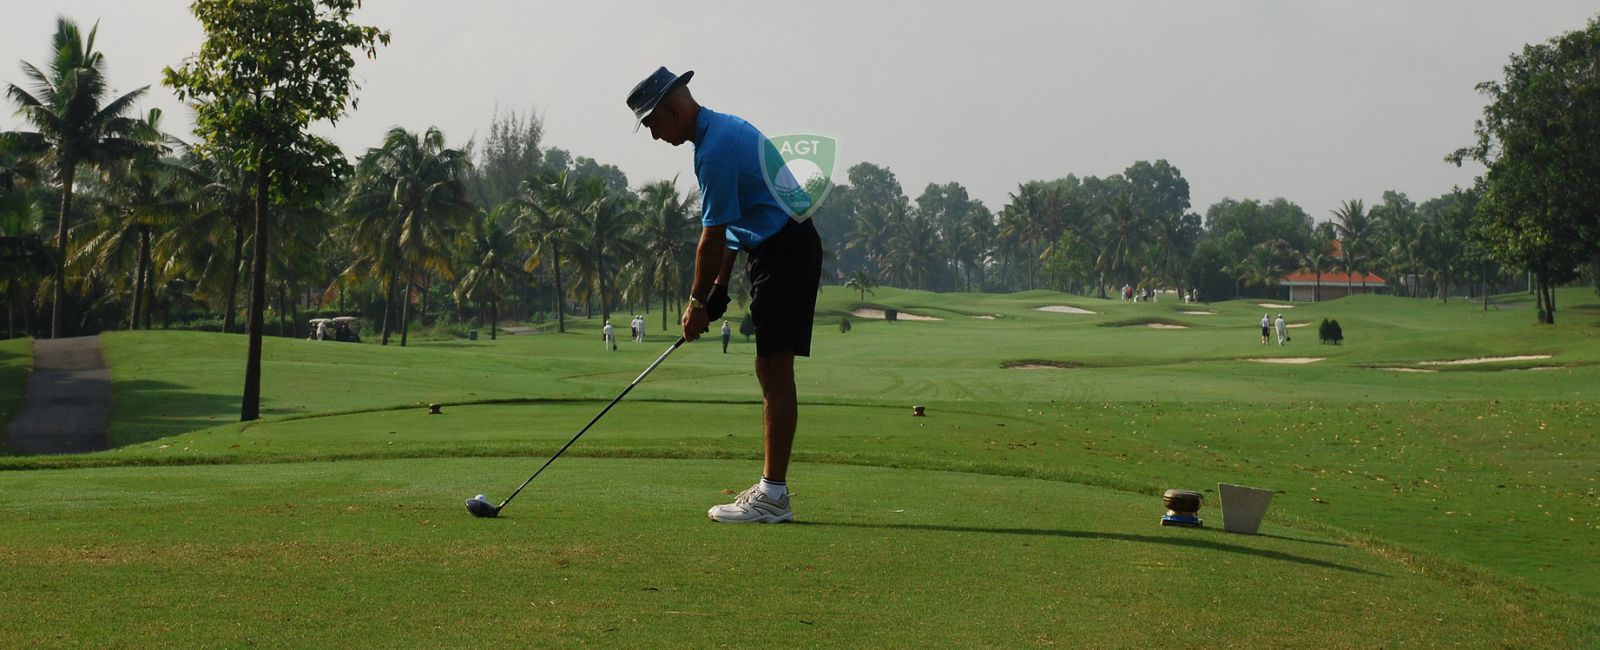 Saigon Golf Package 3 Days 2 Nights and 2 Rounds